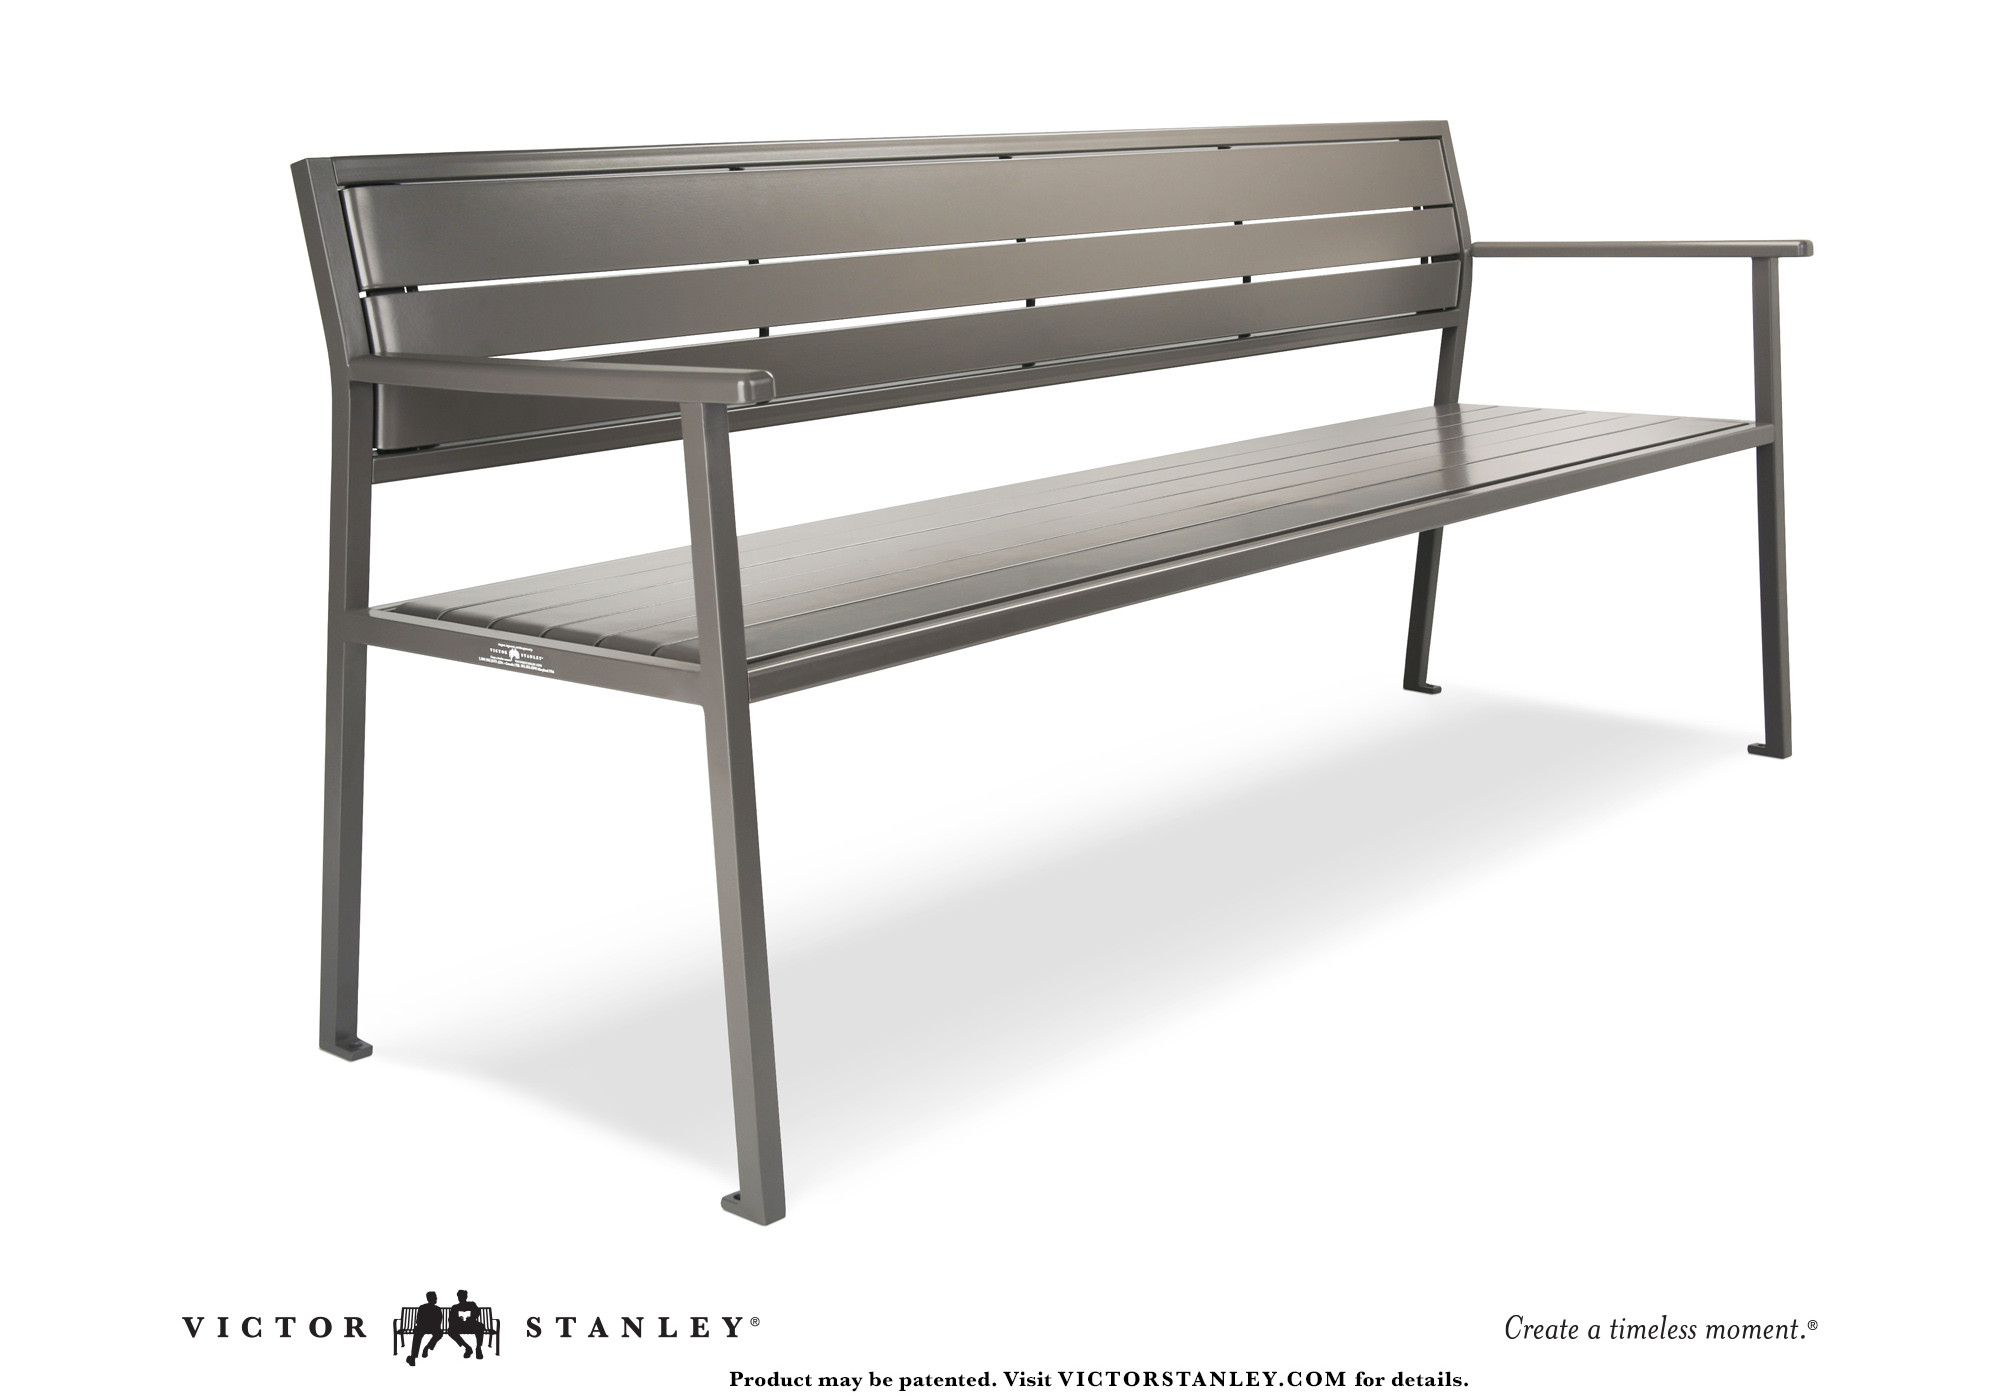 Stell Victor Stanley Site Furniture